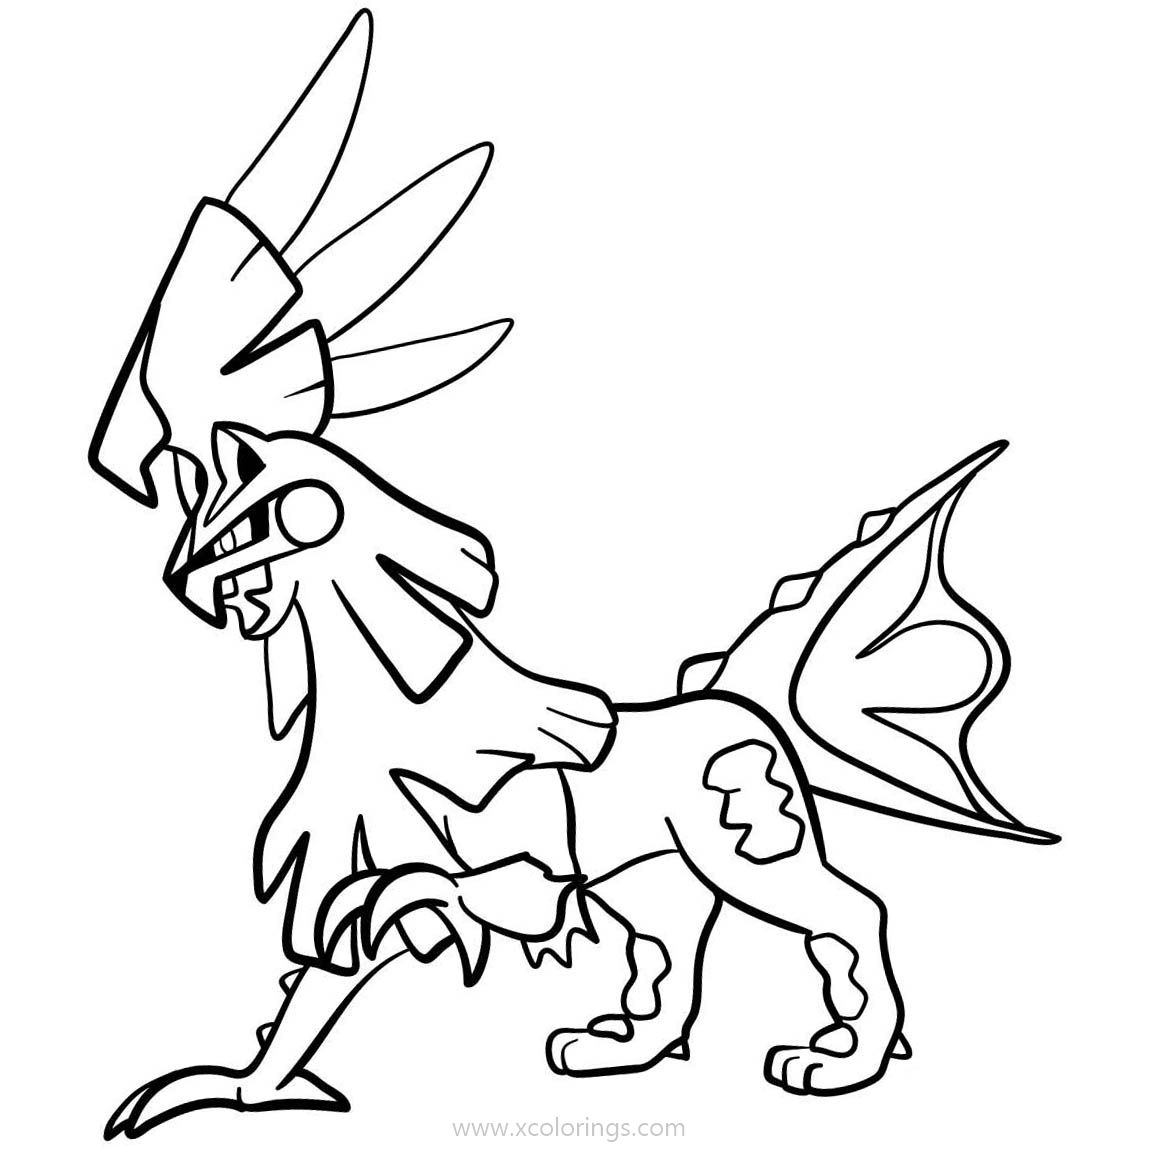 Free Silvally from Pokemon Coloring Pages printable